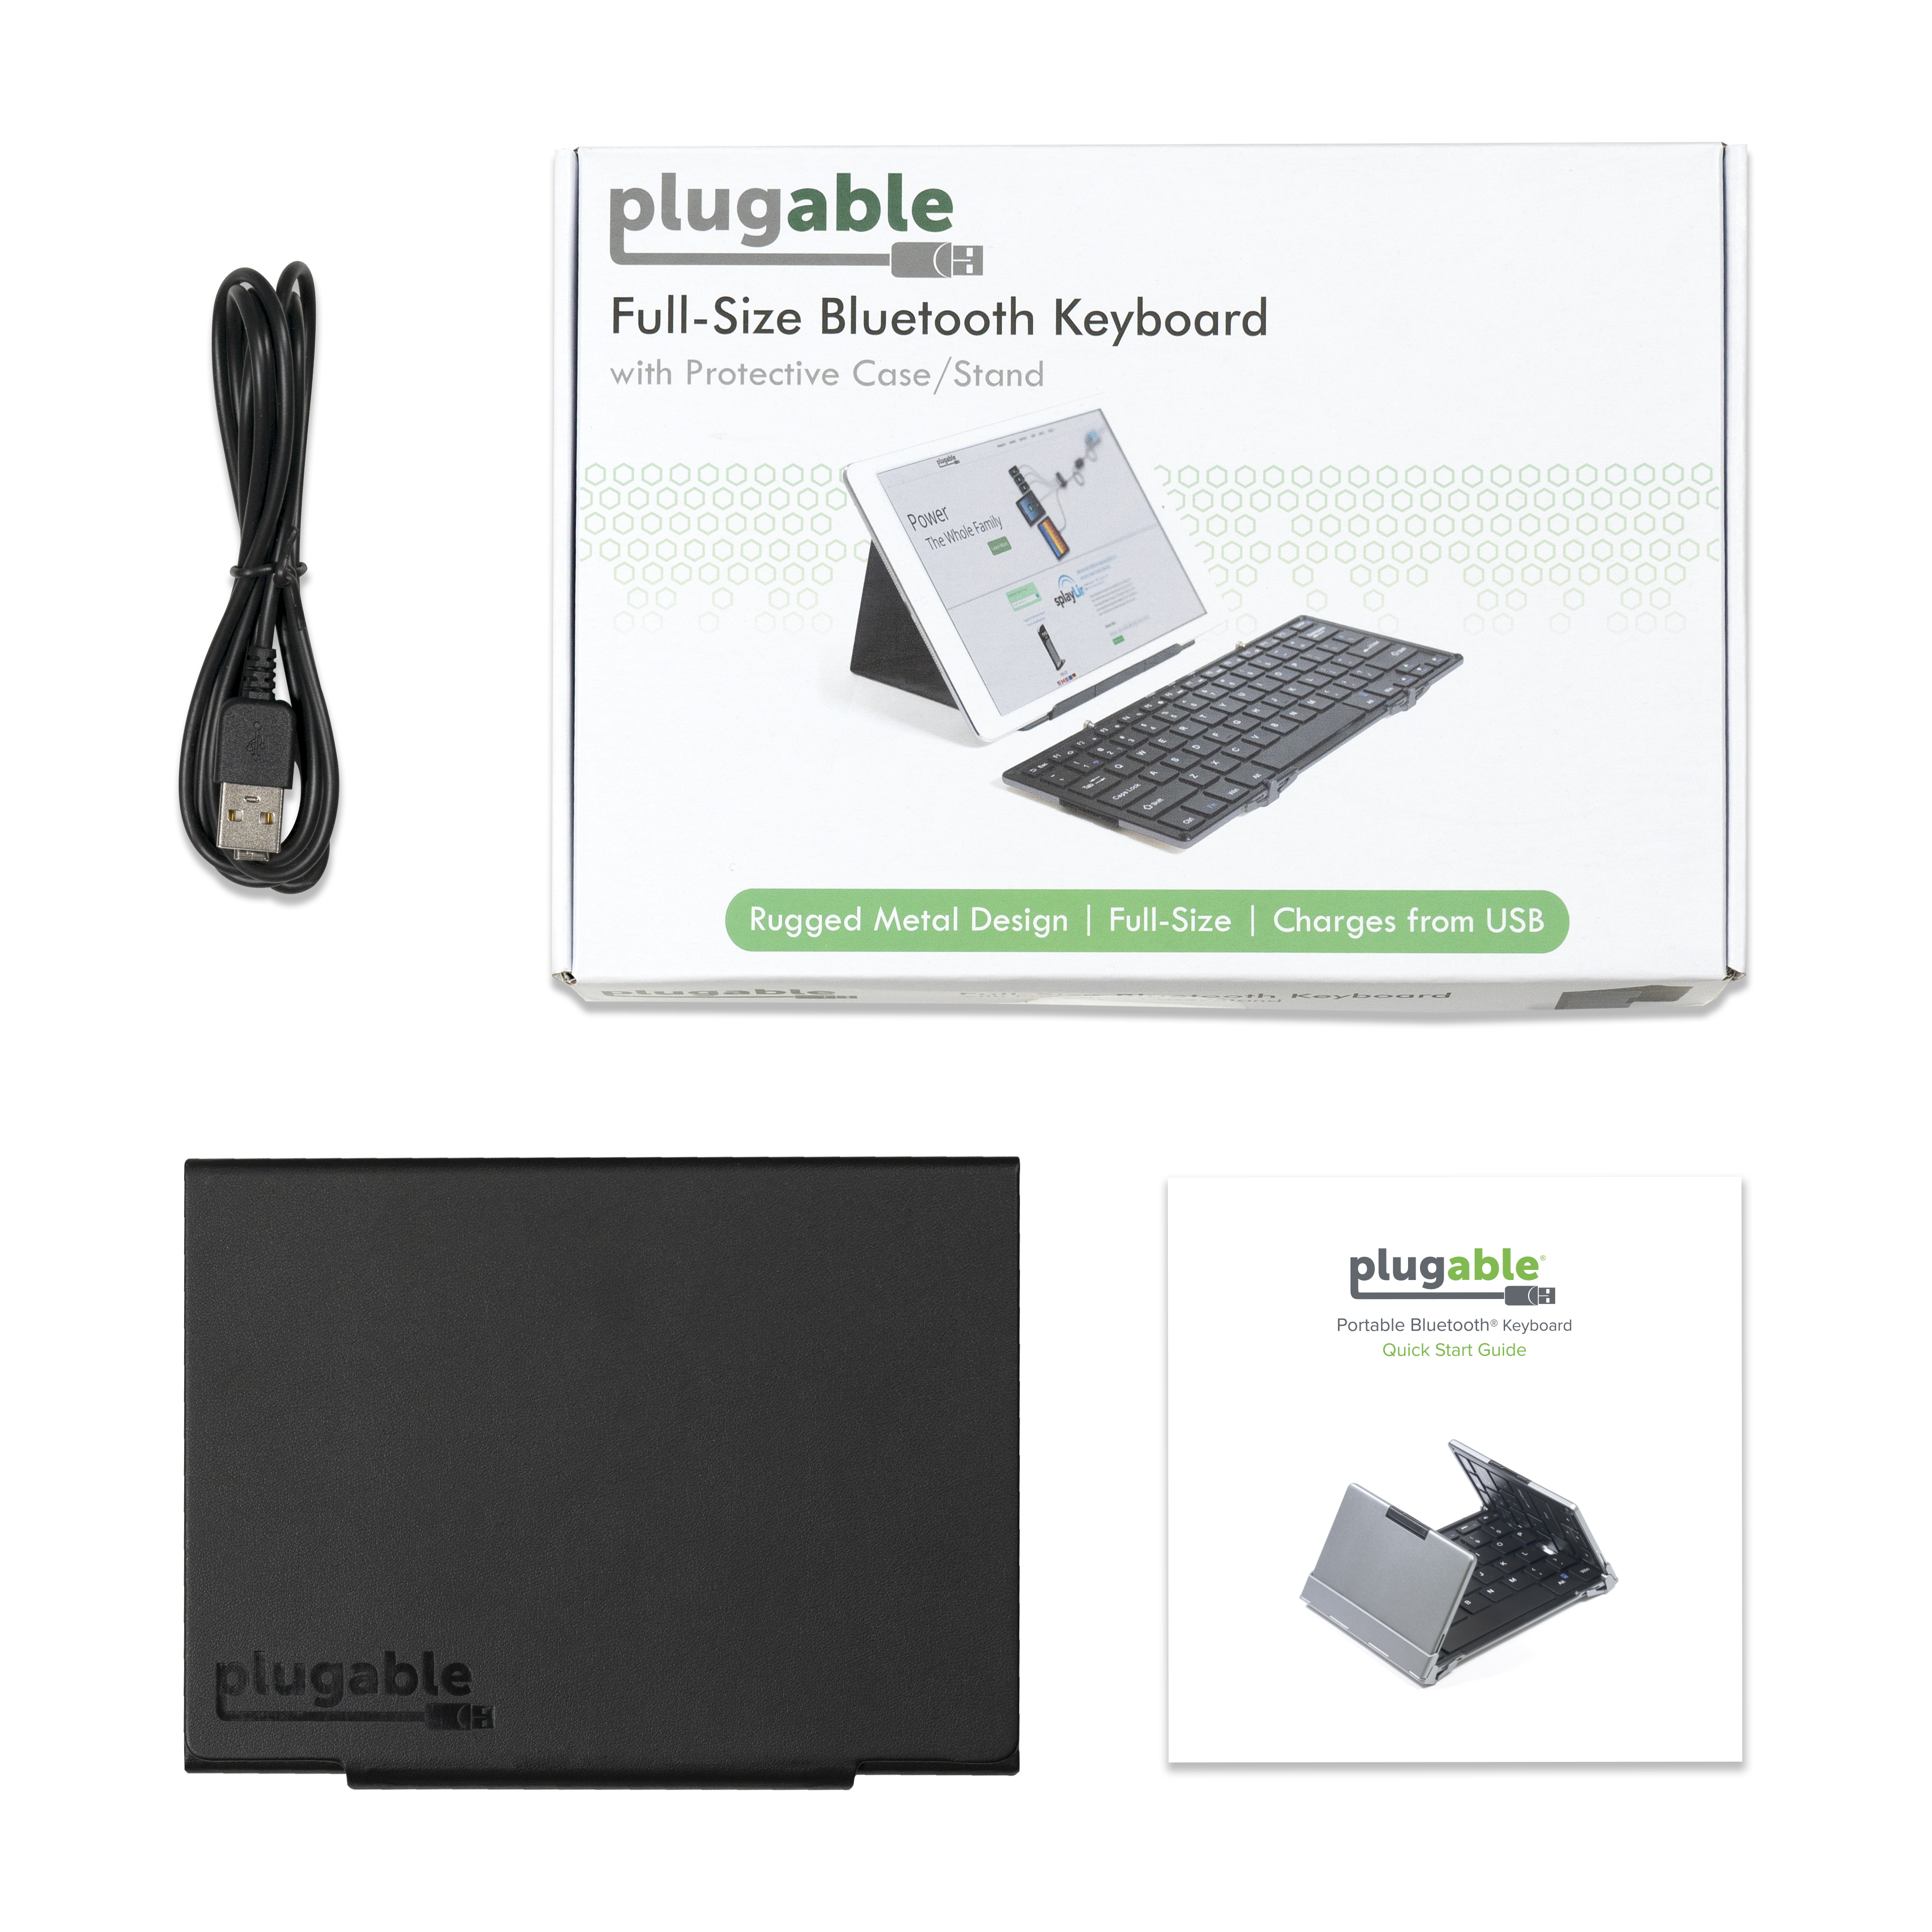 Plugable Foldable Bluetooth Keyboard Compatible with iPad, iPhones, Android, and Windows, Full-Size Multi-Device Keyboard, Wireless and Portable with Included Stand for iPad/iPhone (11.5 inches) - image 6 of 8